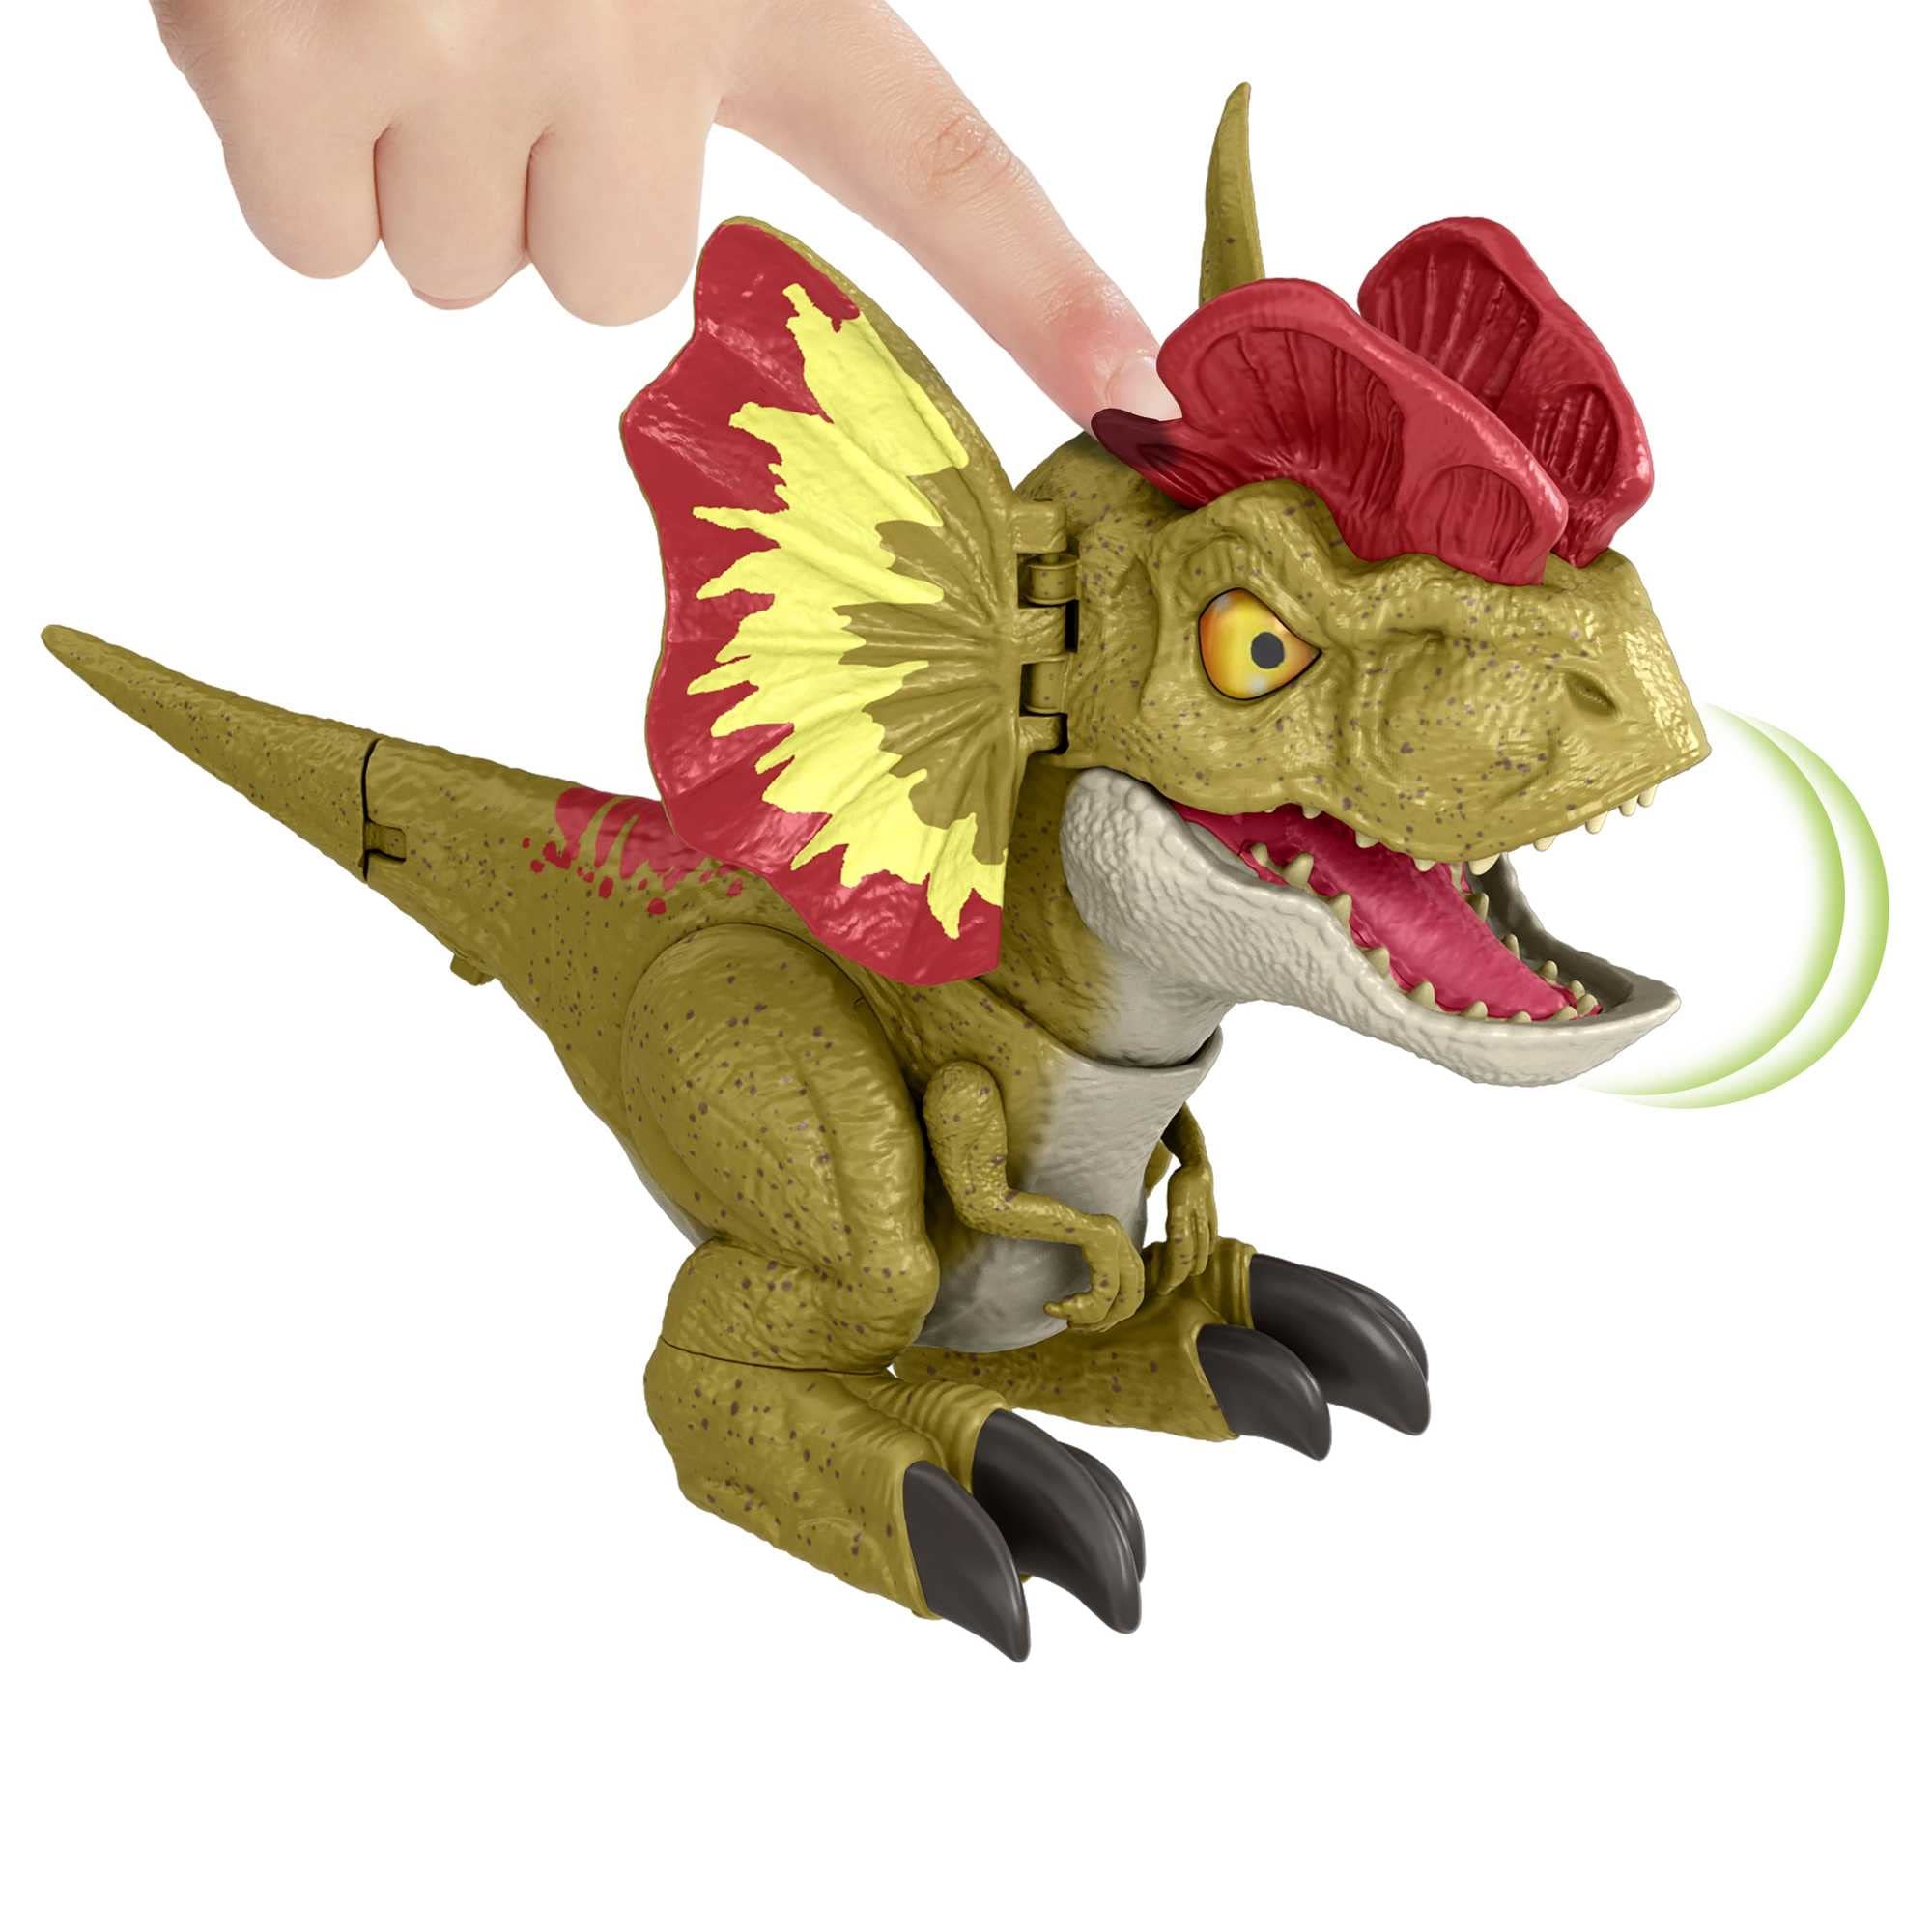 Mattel Jurassic World Dominion Uncaged Rowdy Roars Dilophosaurus Dinosaur Action Figure, Toy with Interactive Motion & Sound $4.68 + Free Shipping w/ Prime or on $35+